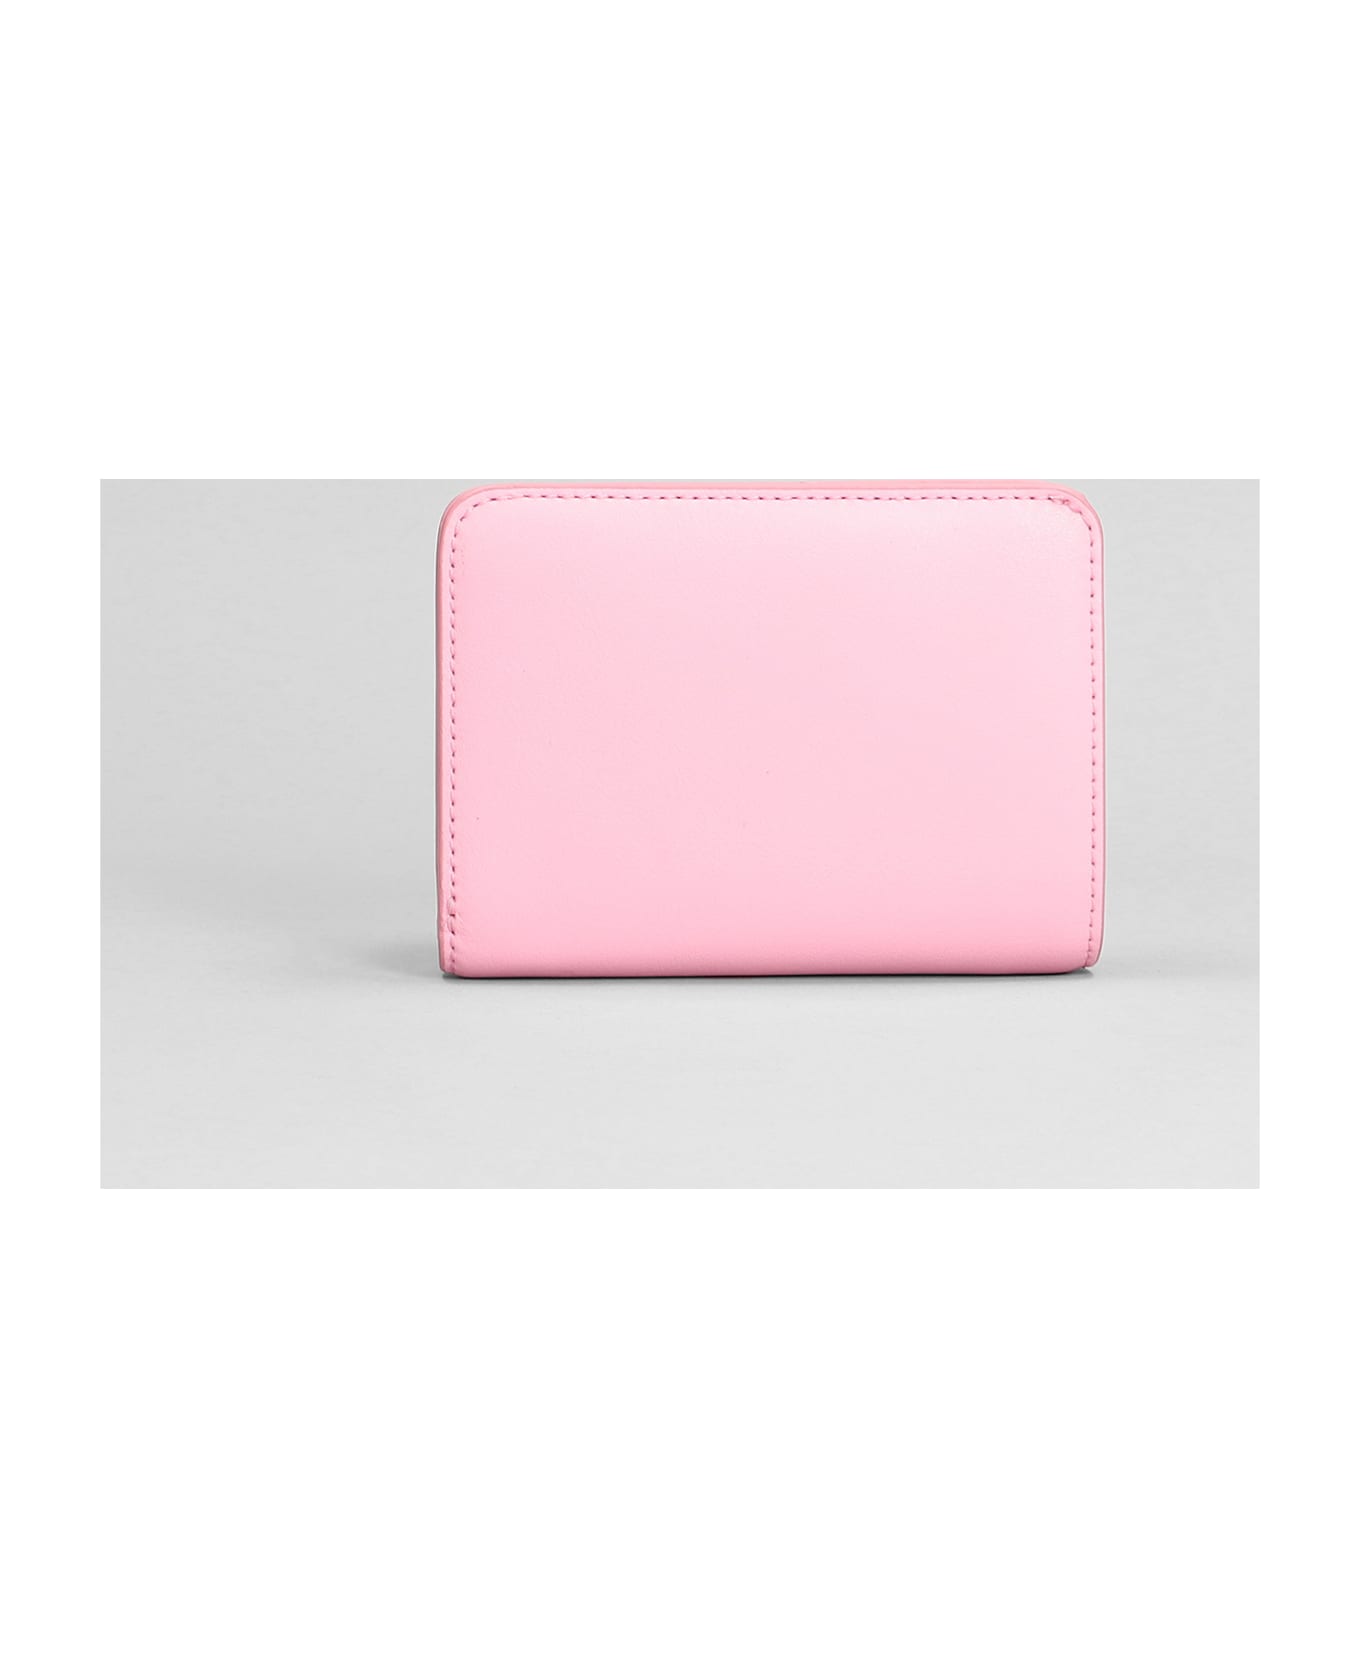 Marc Jacobs The J Marc Compact Wallet - rose-pink 財布